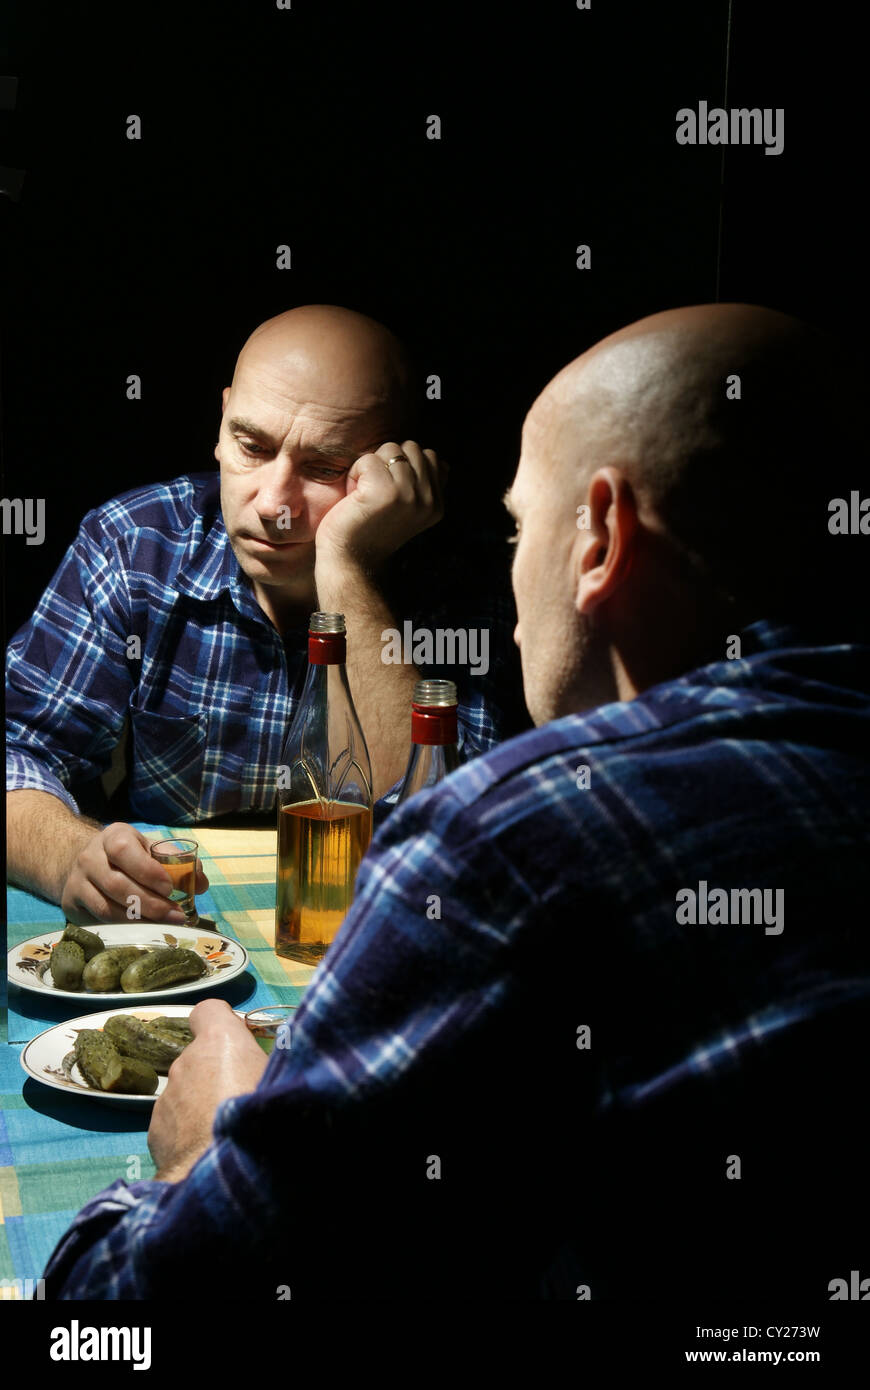 lonely drinking man with reflection in mirror Stock Photo